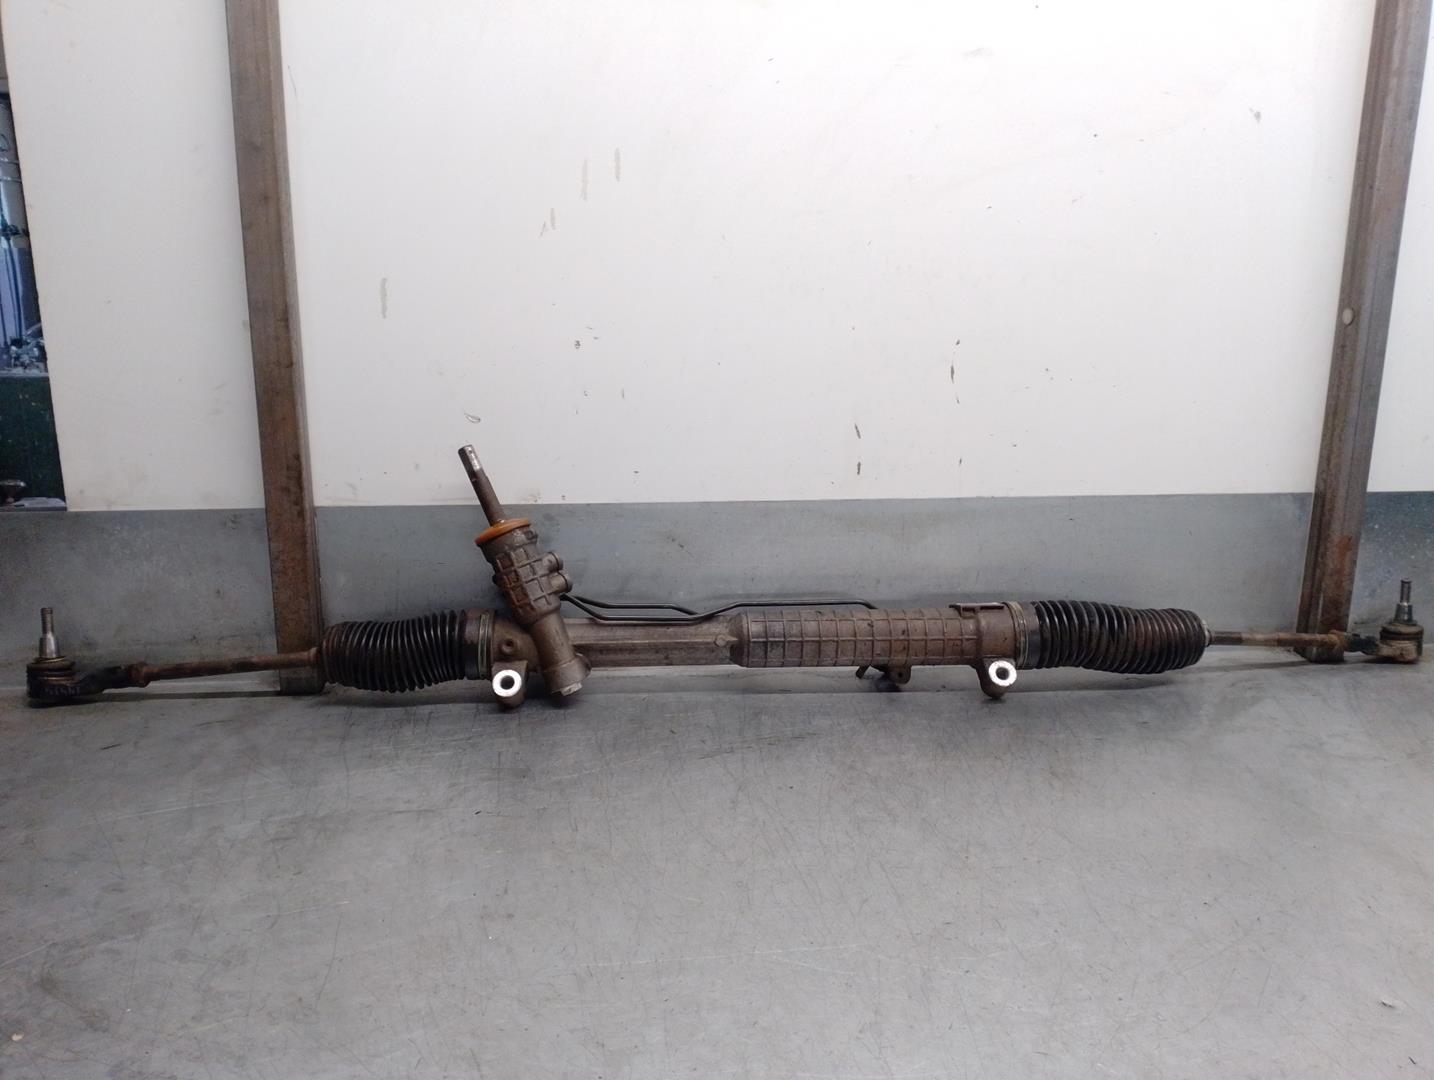 LAND ROVER Discovery 3 generation (2004-2009) Steering Rack QEB500285, A0006339, TRW 24219956